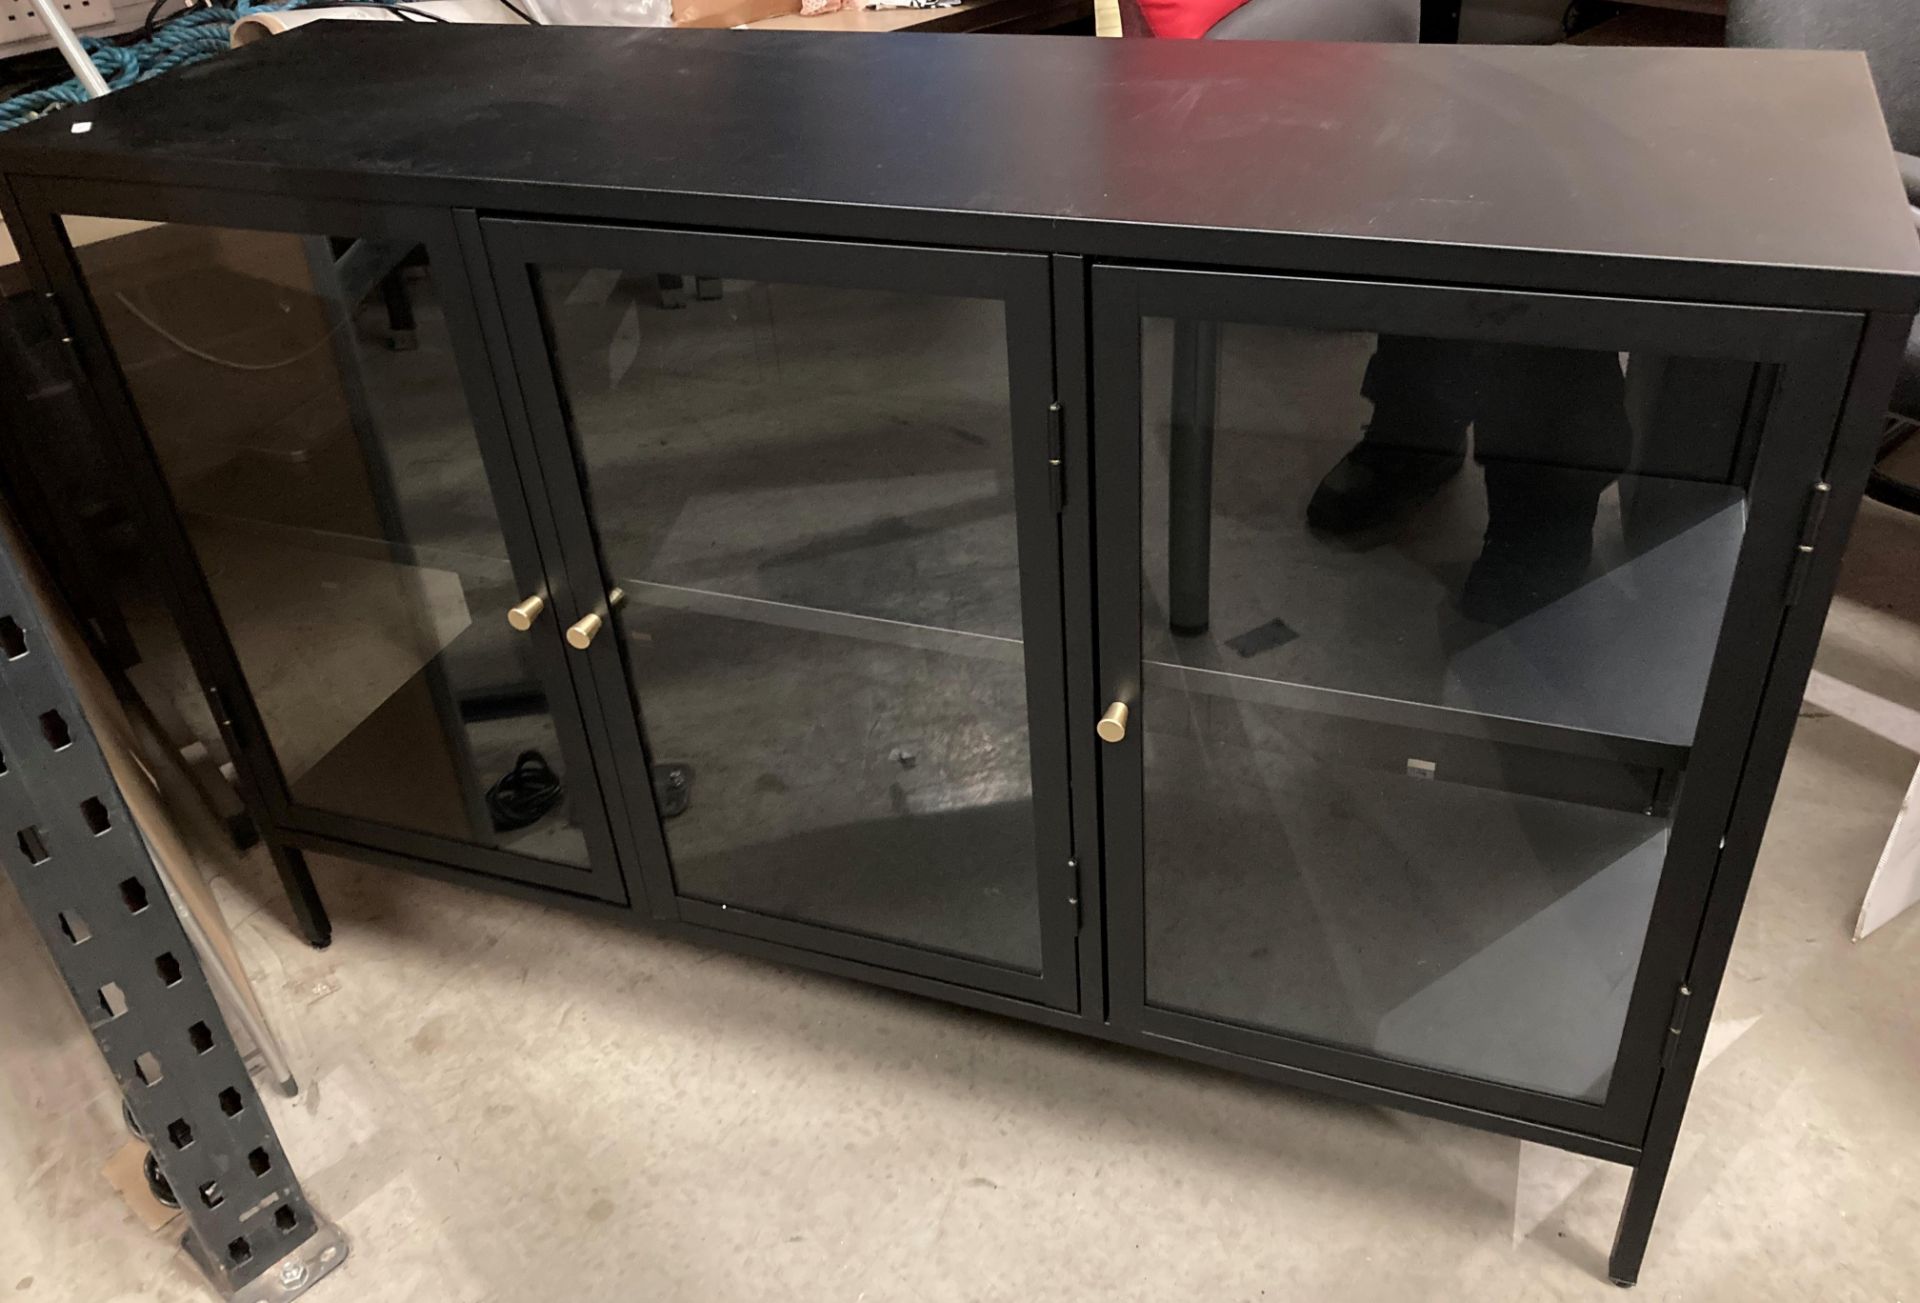 Rectangular metal work table 180cm x 60cm x 70cm high and black metal and glass three door office - Image 2 of 2